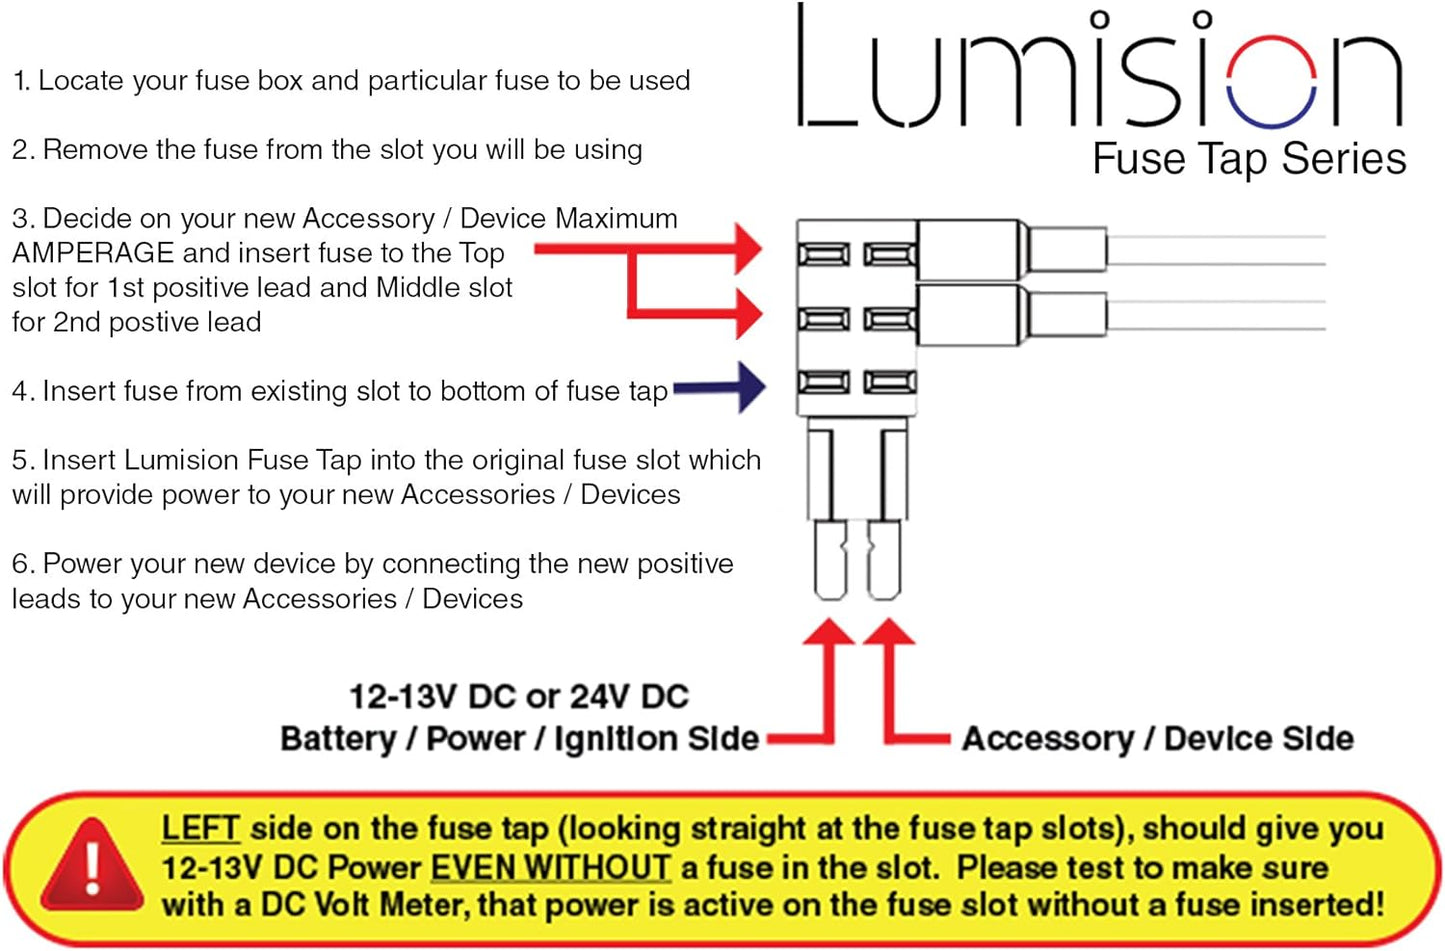 Lumision Dual Fuse Tap Micro2 APT ATR with 5 AMP Fuses Automotive Boat RV 2 Leads Adds 2 positive lines add-a-circuit